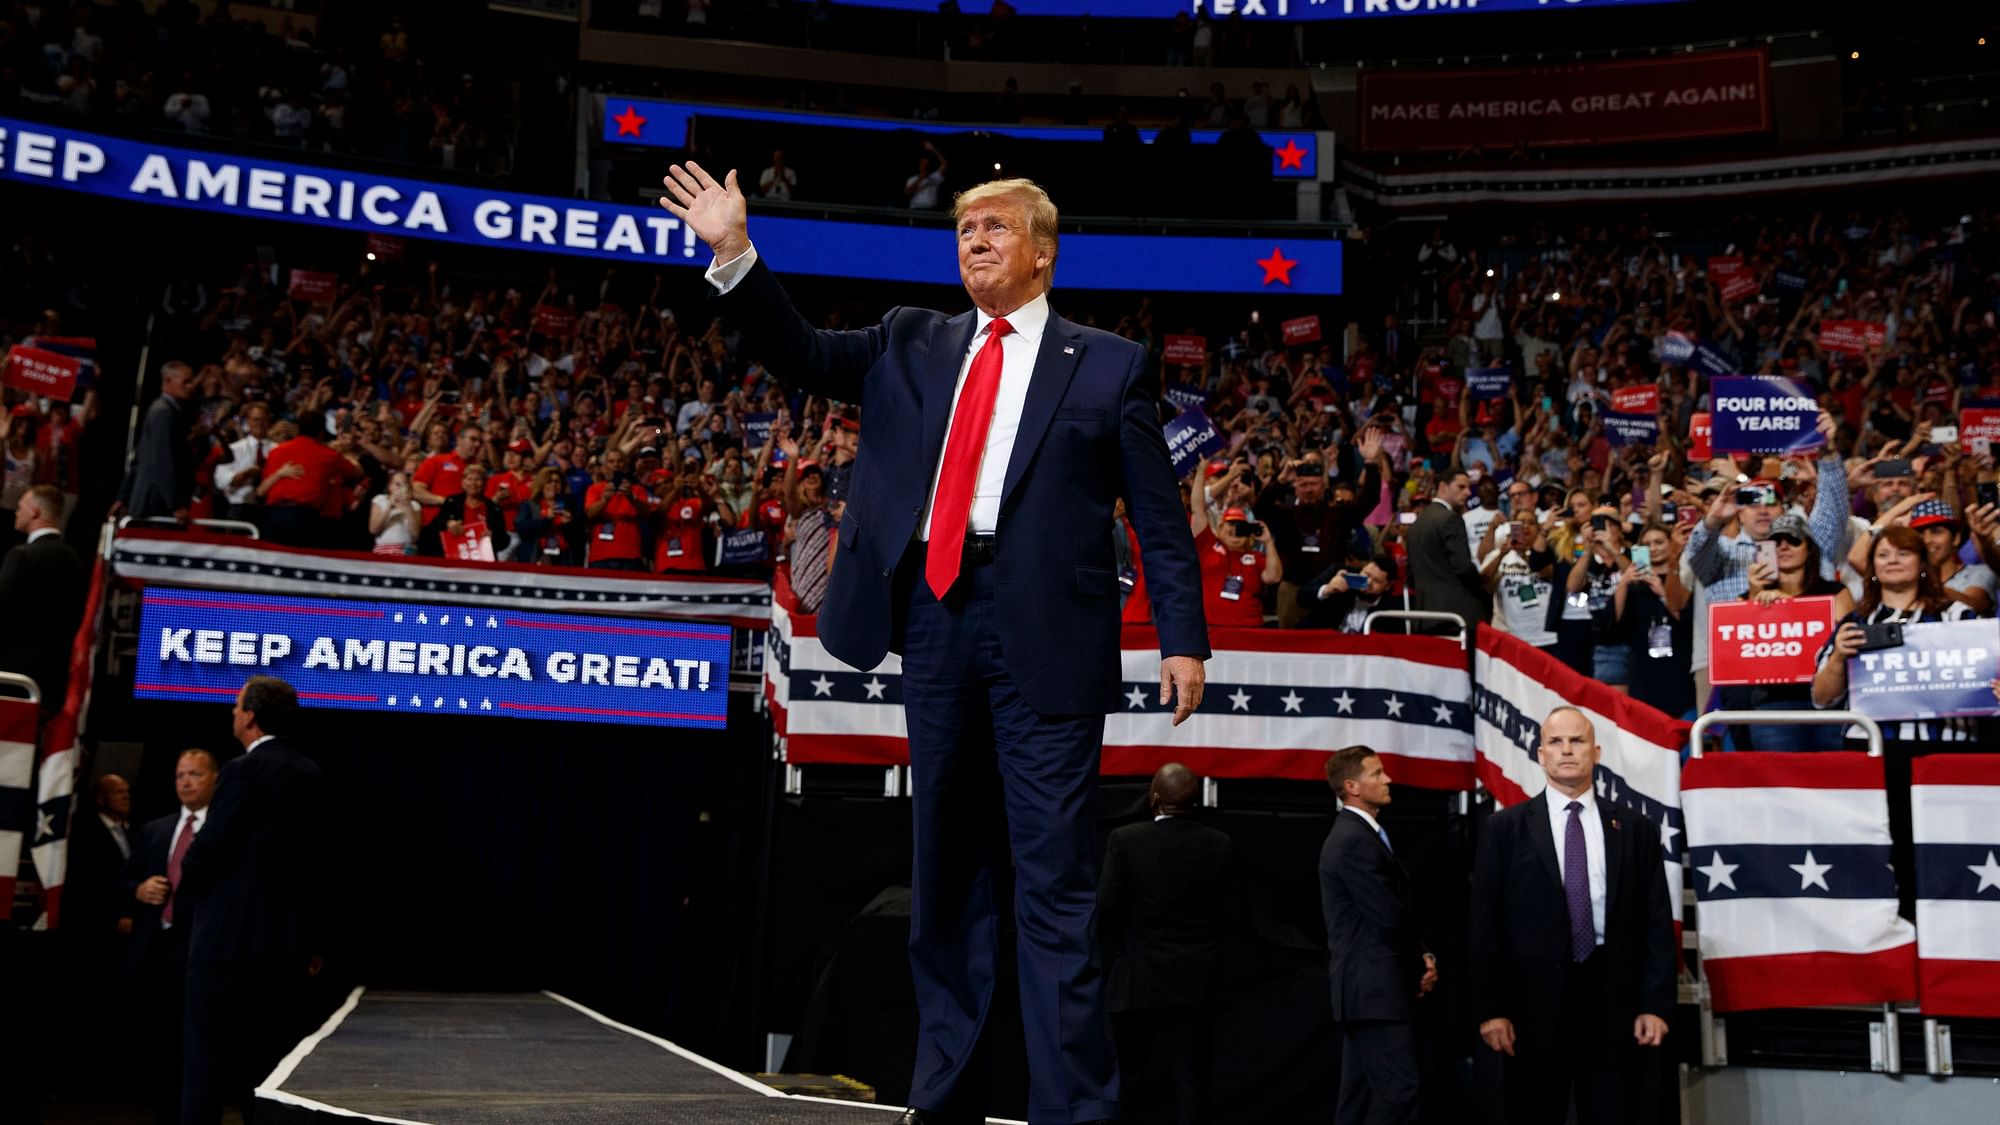 Addressing a crowd of thousands at the Amway Center in Orlando, Florida, Trump complained he had been “under assault from the very first day” of his presidency.